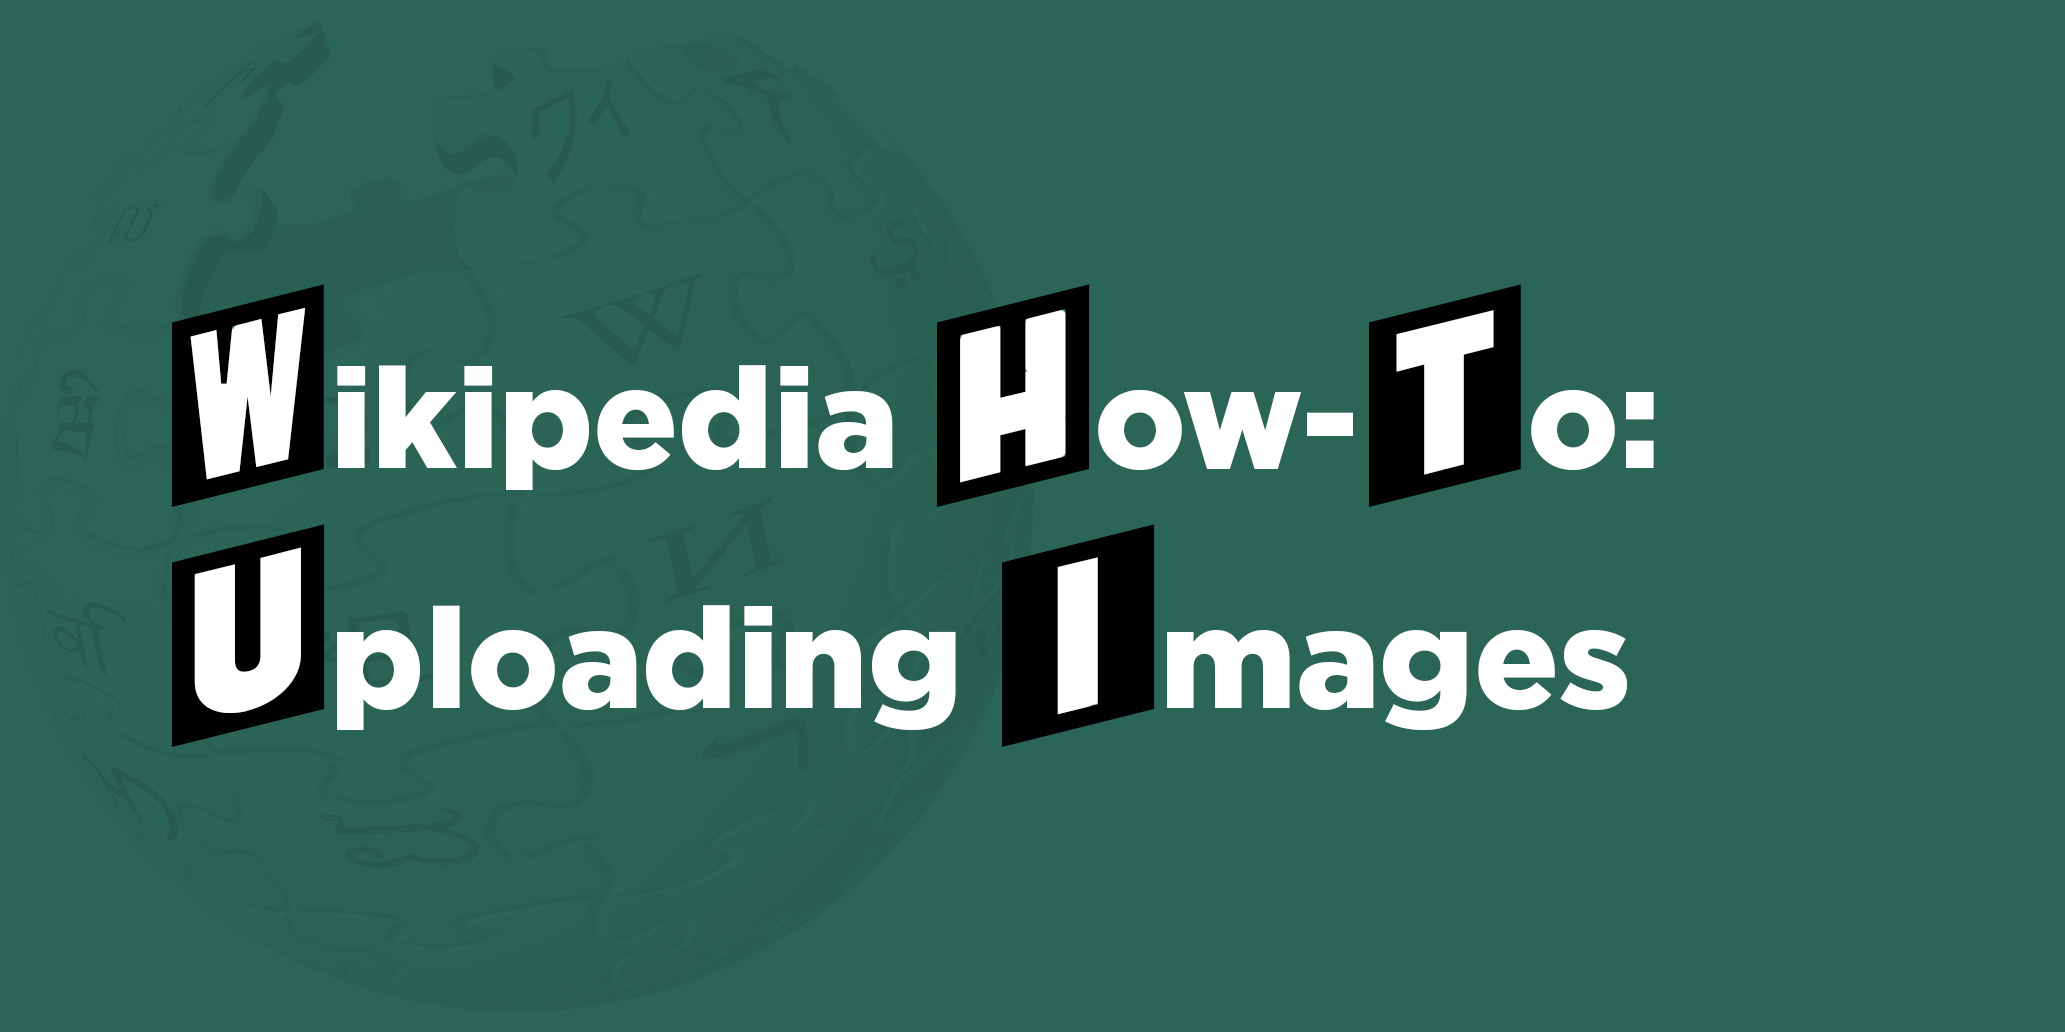 Wikipedia How-To: Uploading Images